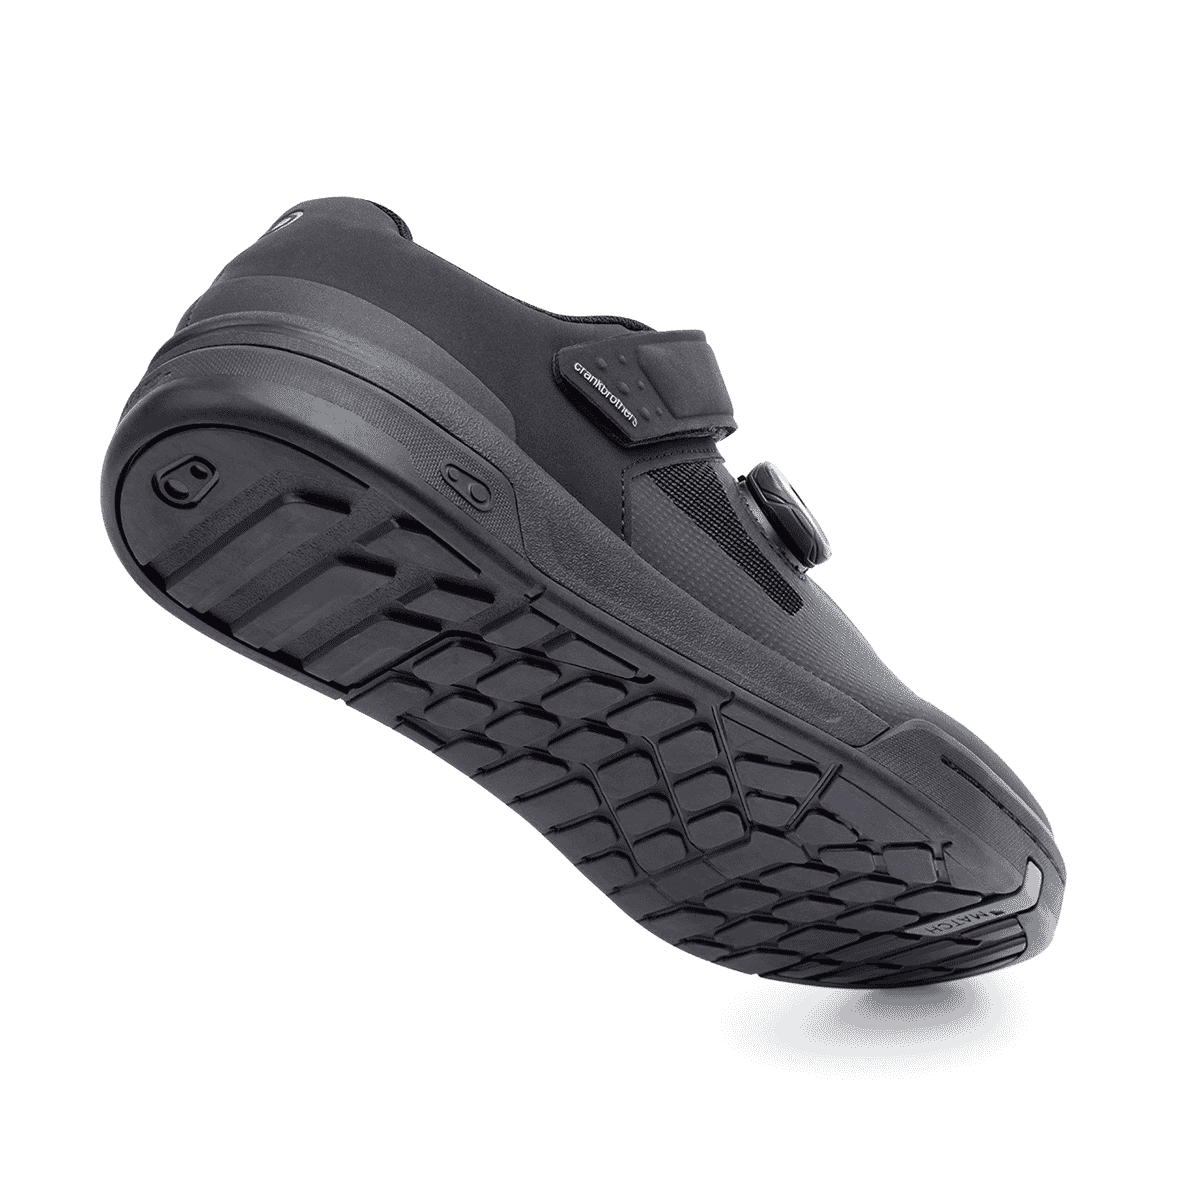 Chaussures VTT CRANKBROTHERS STAMP BOA Noir/Or